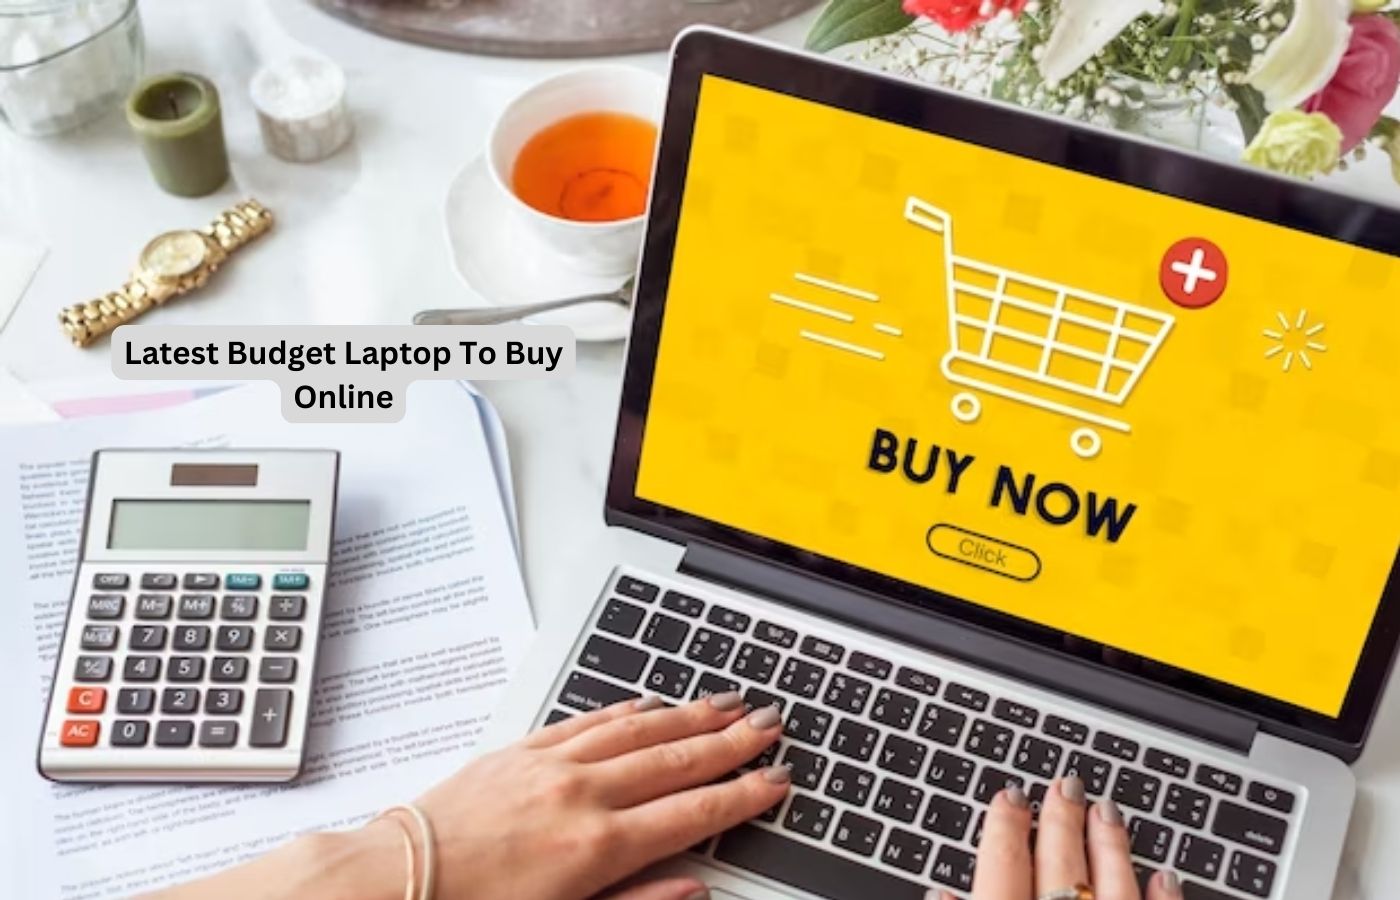 Latest Budget Laptop To Buy Online